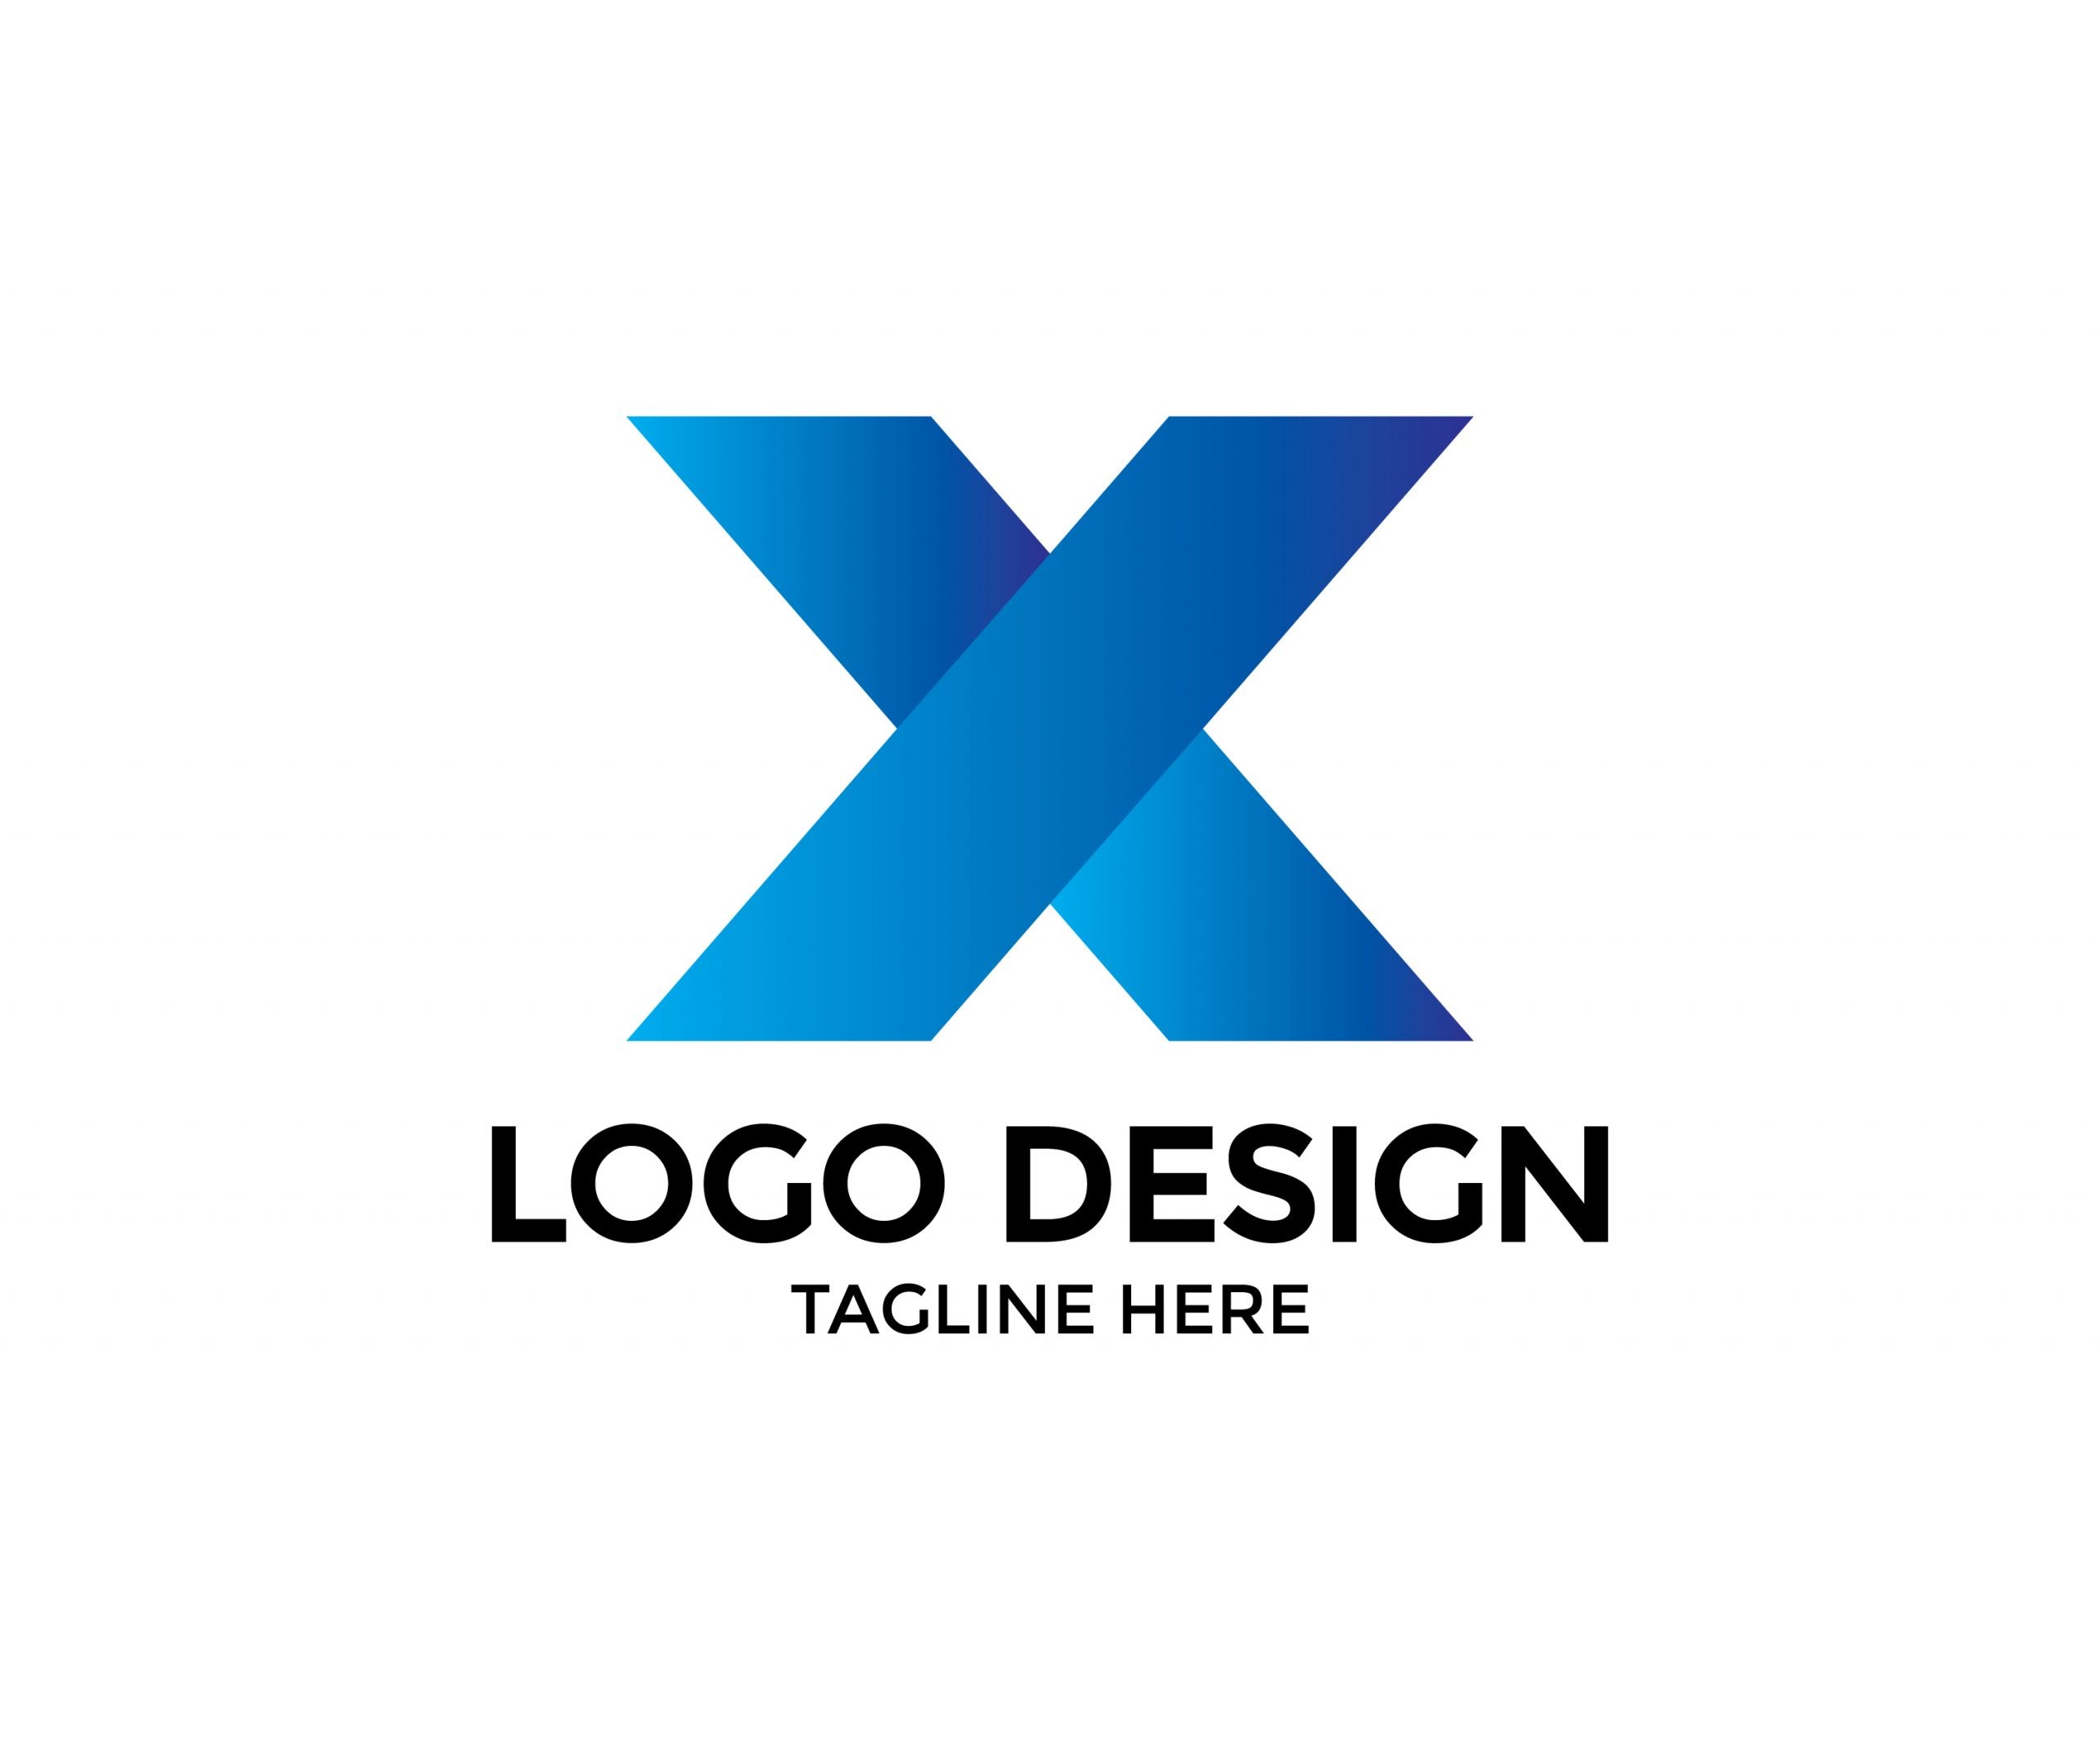 X Letter Vector Logo Design Pngstation Free Graphic Resources